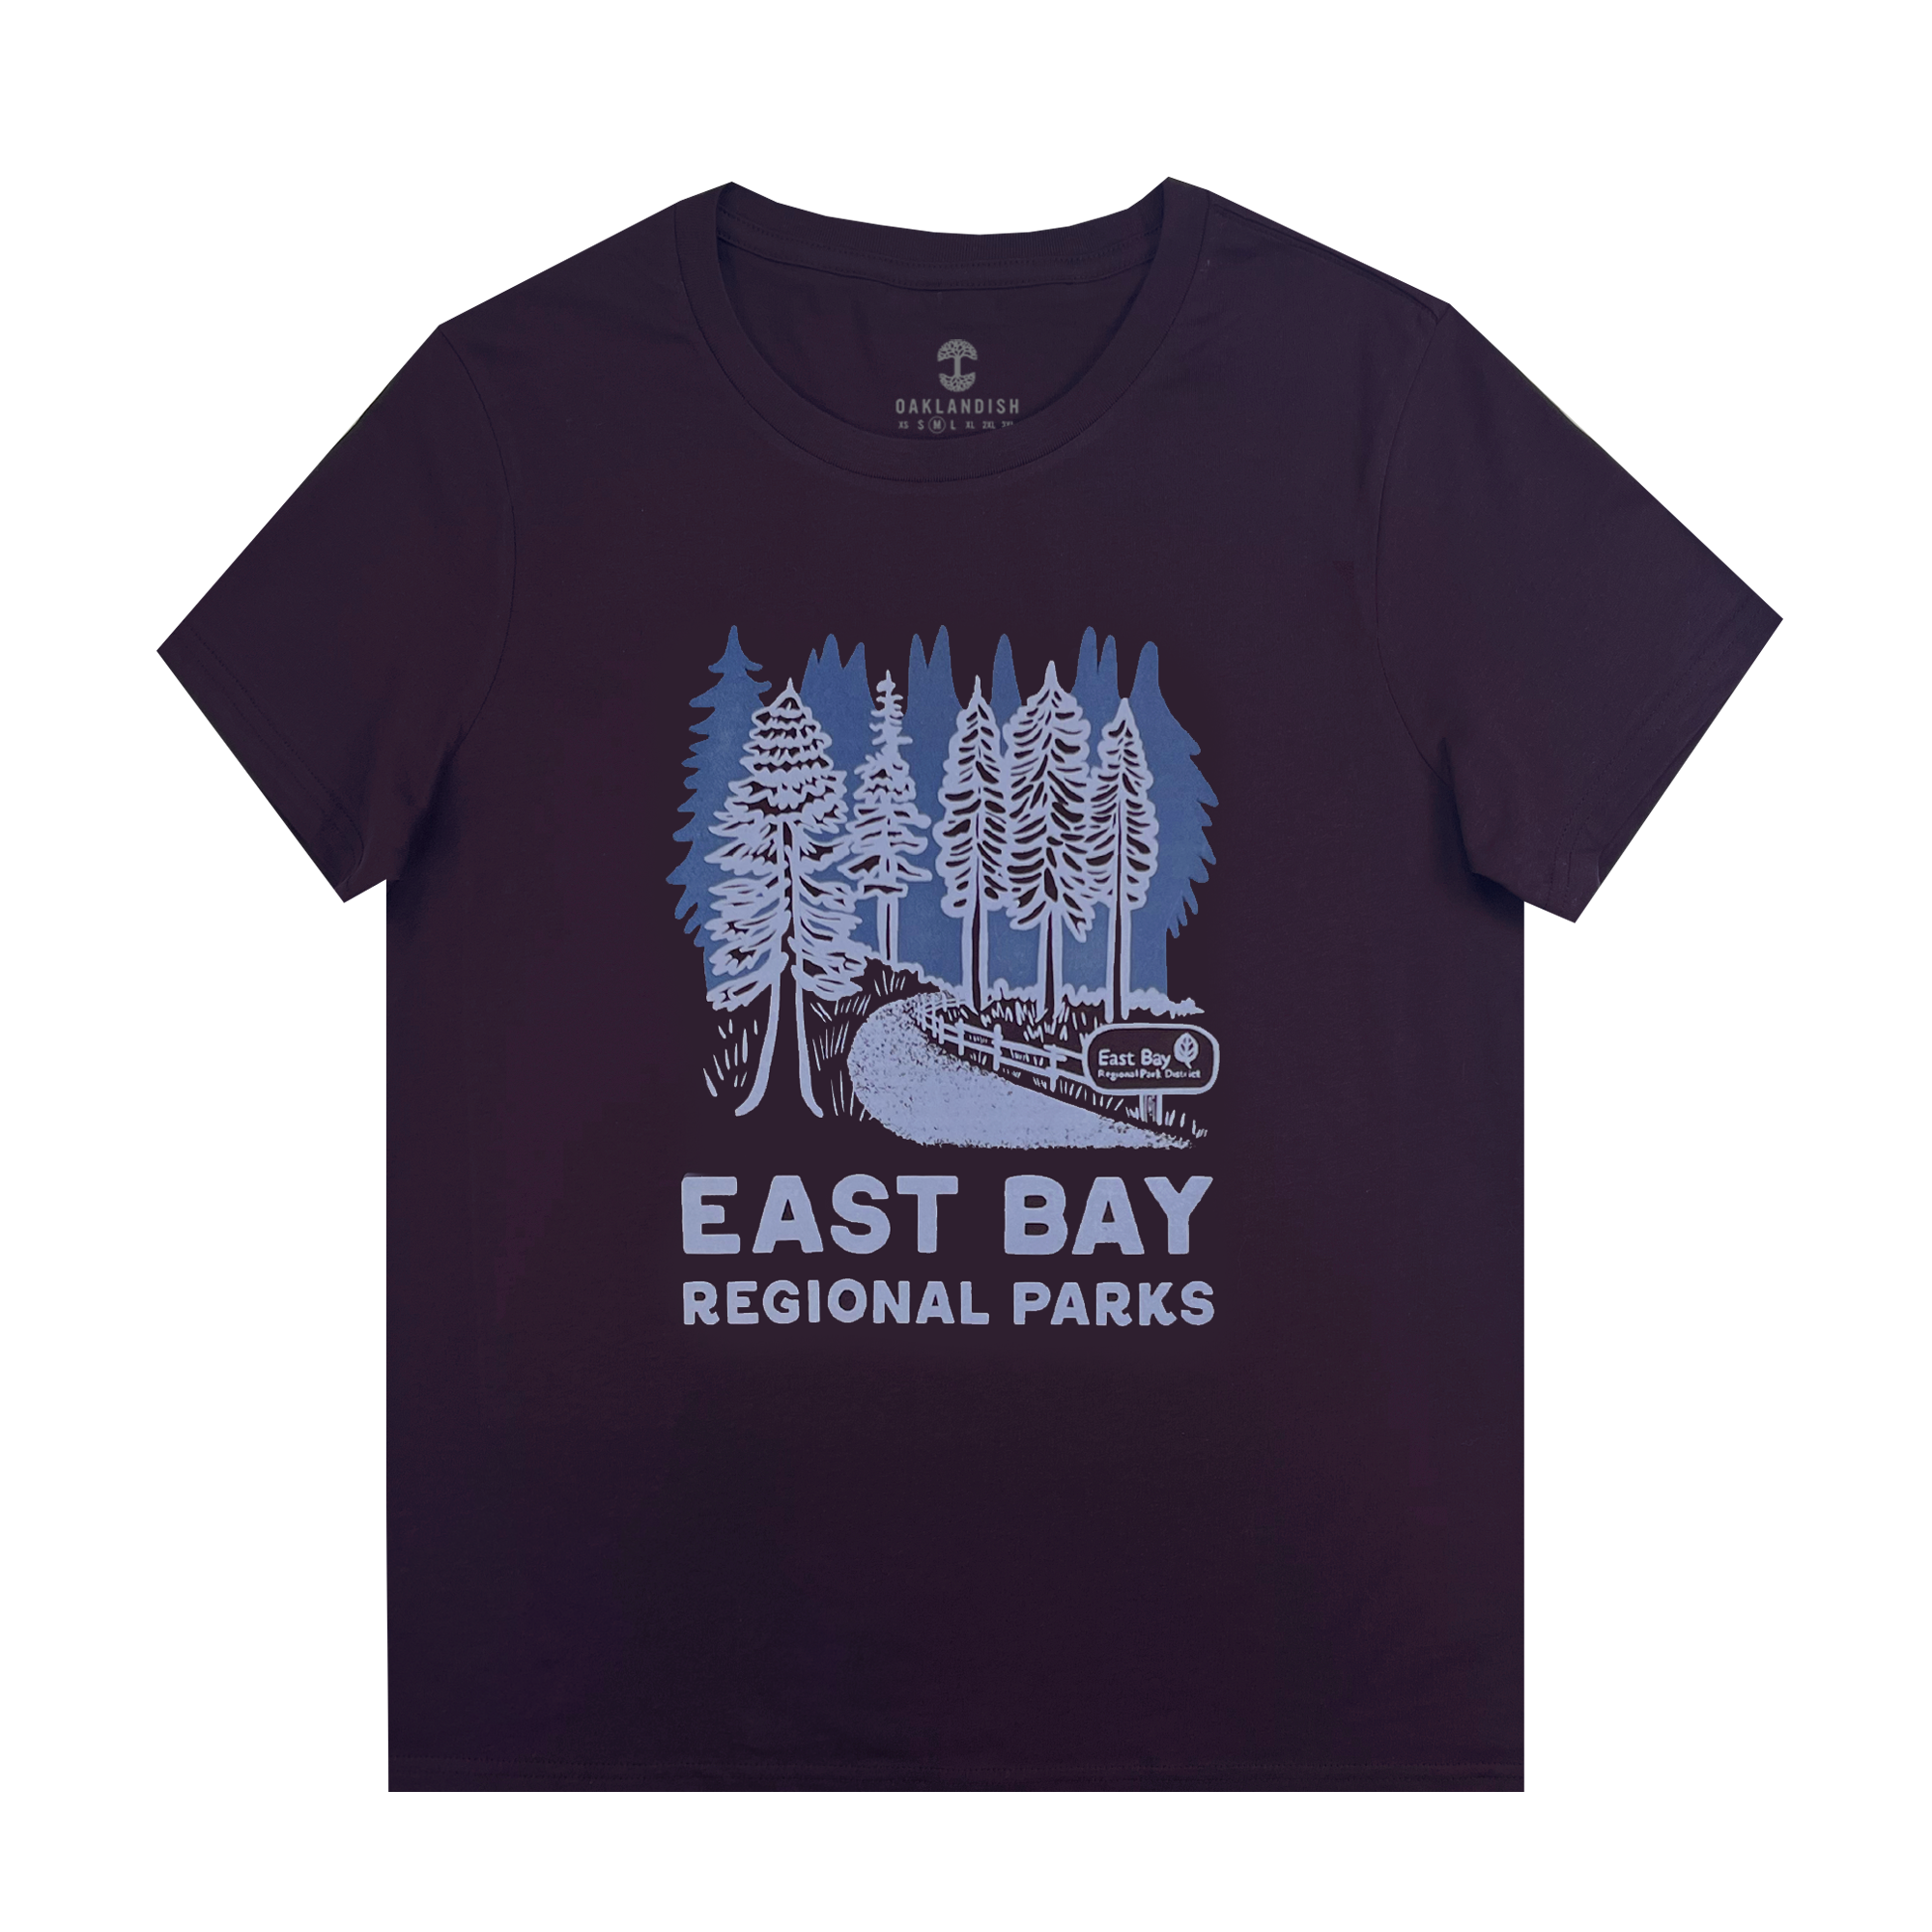 Front view of women's plum color cotton t-shirt with East Bay Regional Parks artwork.